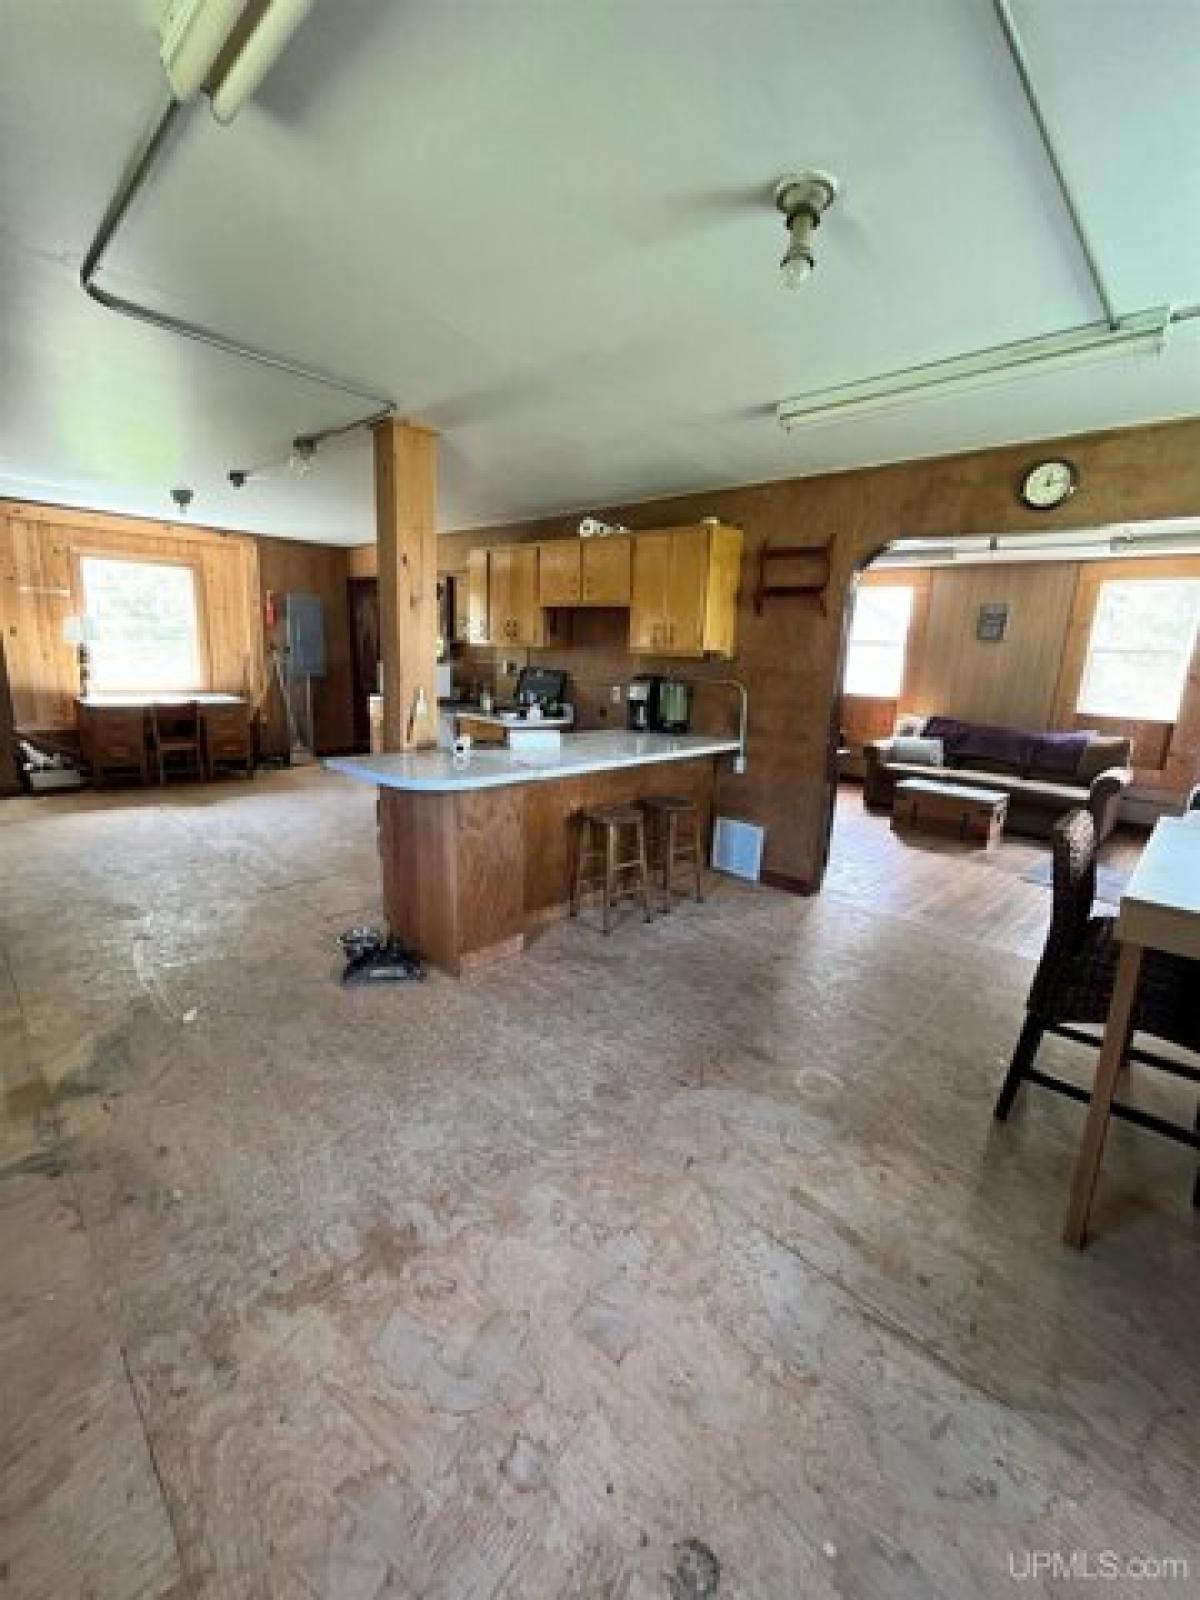 Picture of Home For Sale in Champion, Michigan, United States